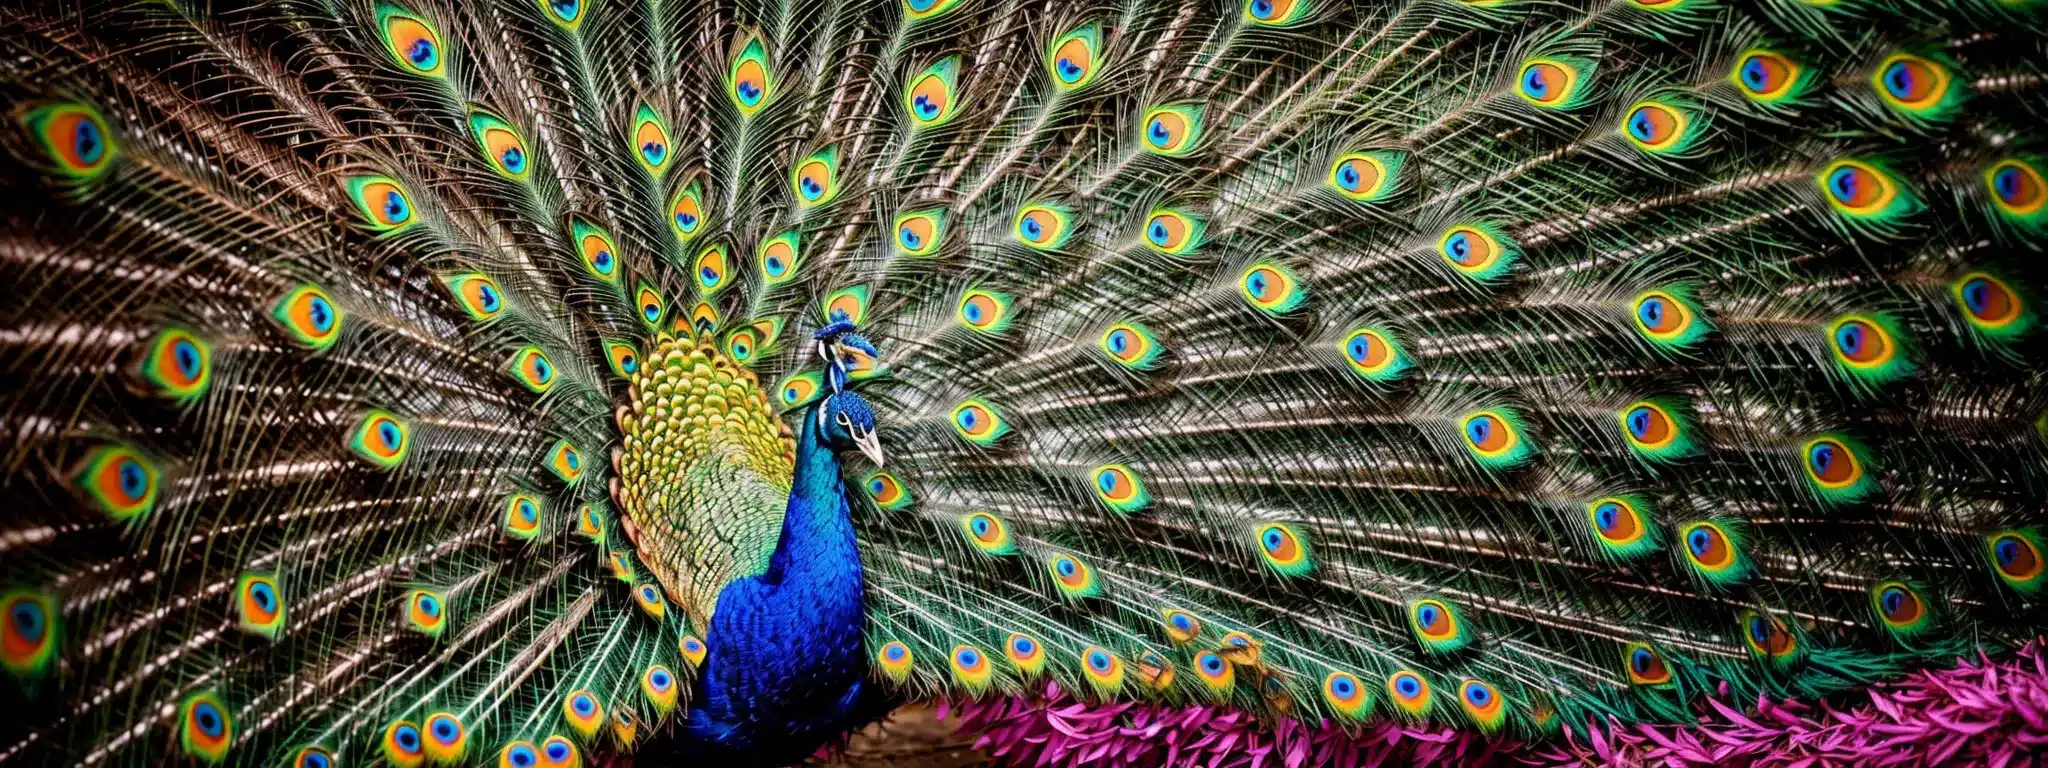 A Vibrant Peacock With Its Feathers Spread Out In Full Display Against An Abstract, Colorful Backdrop, Symbolizing Dynamic And Engaging Brand Content In The Realm Of Social Media.